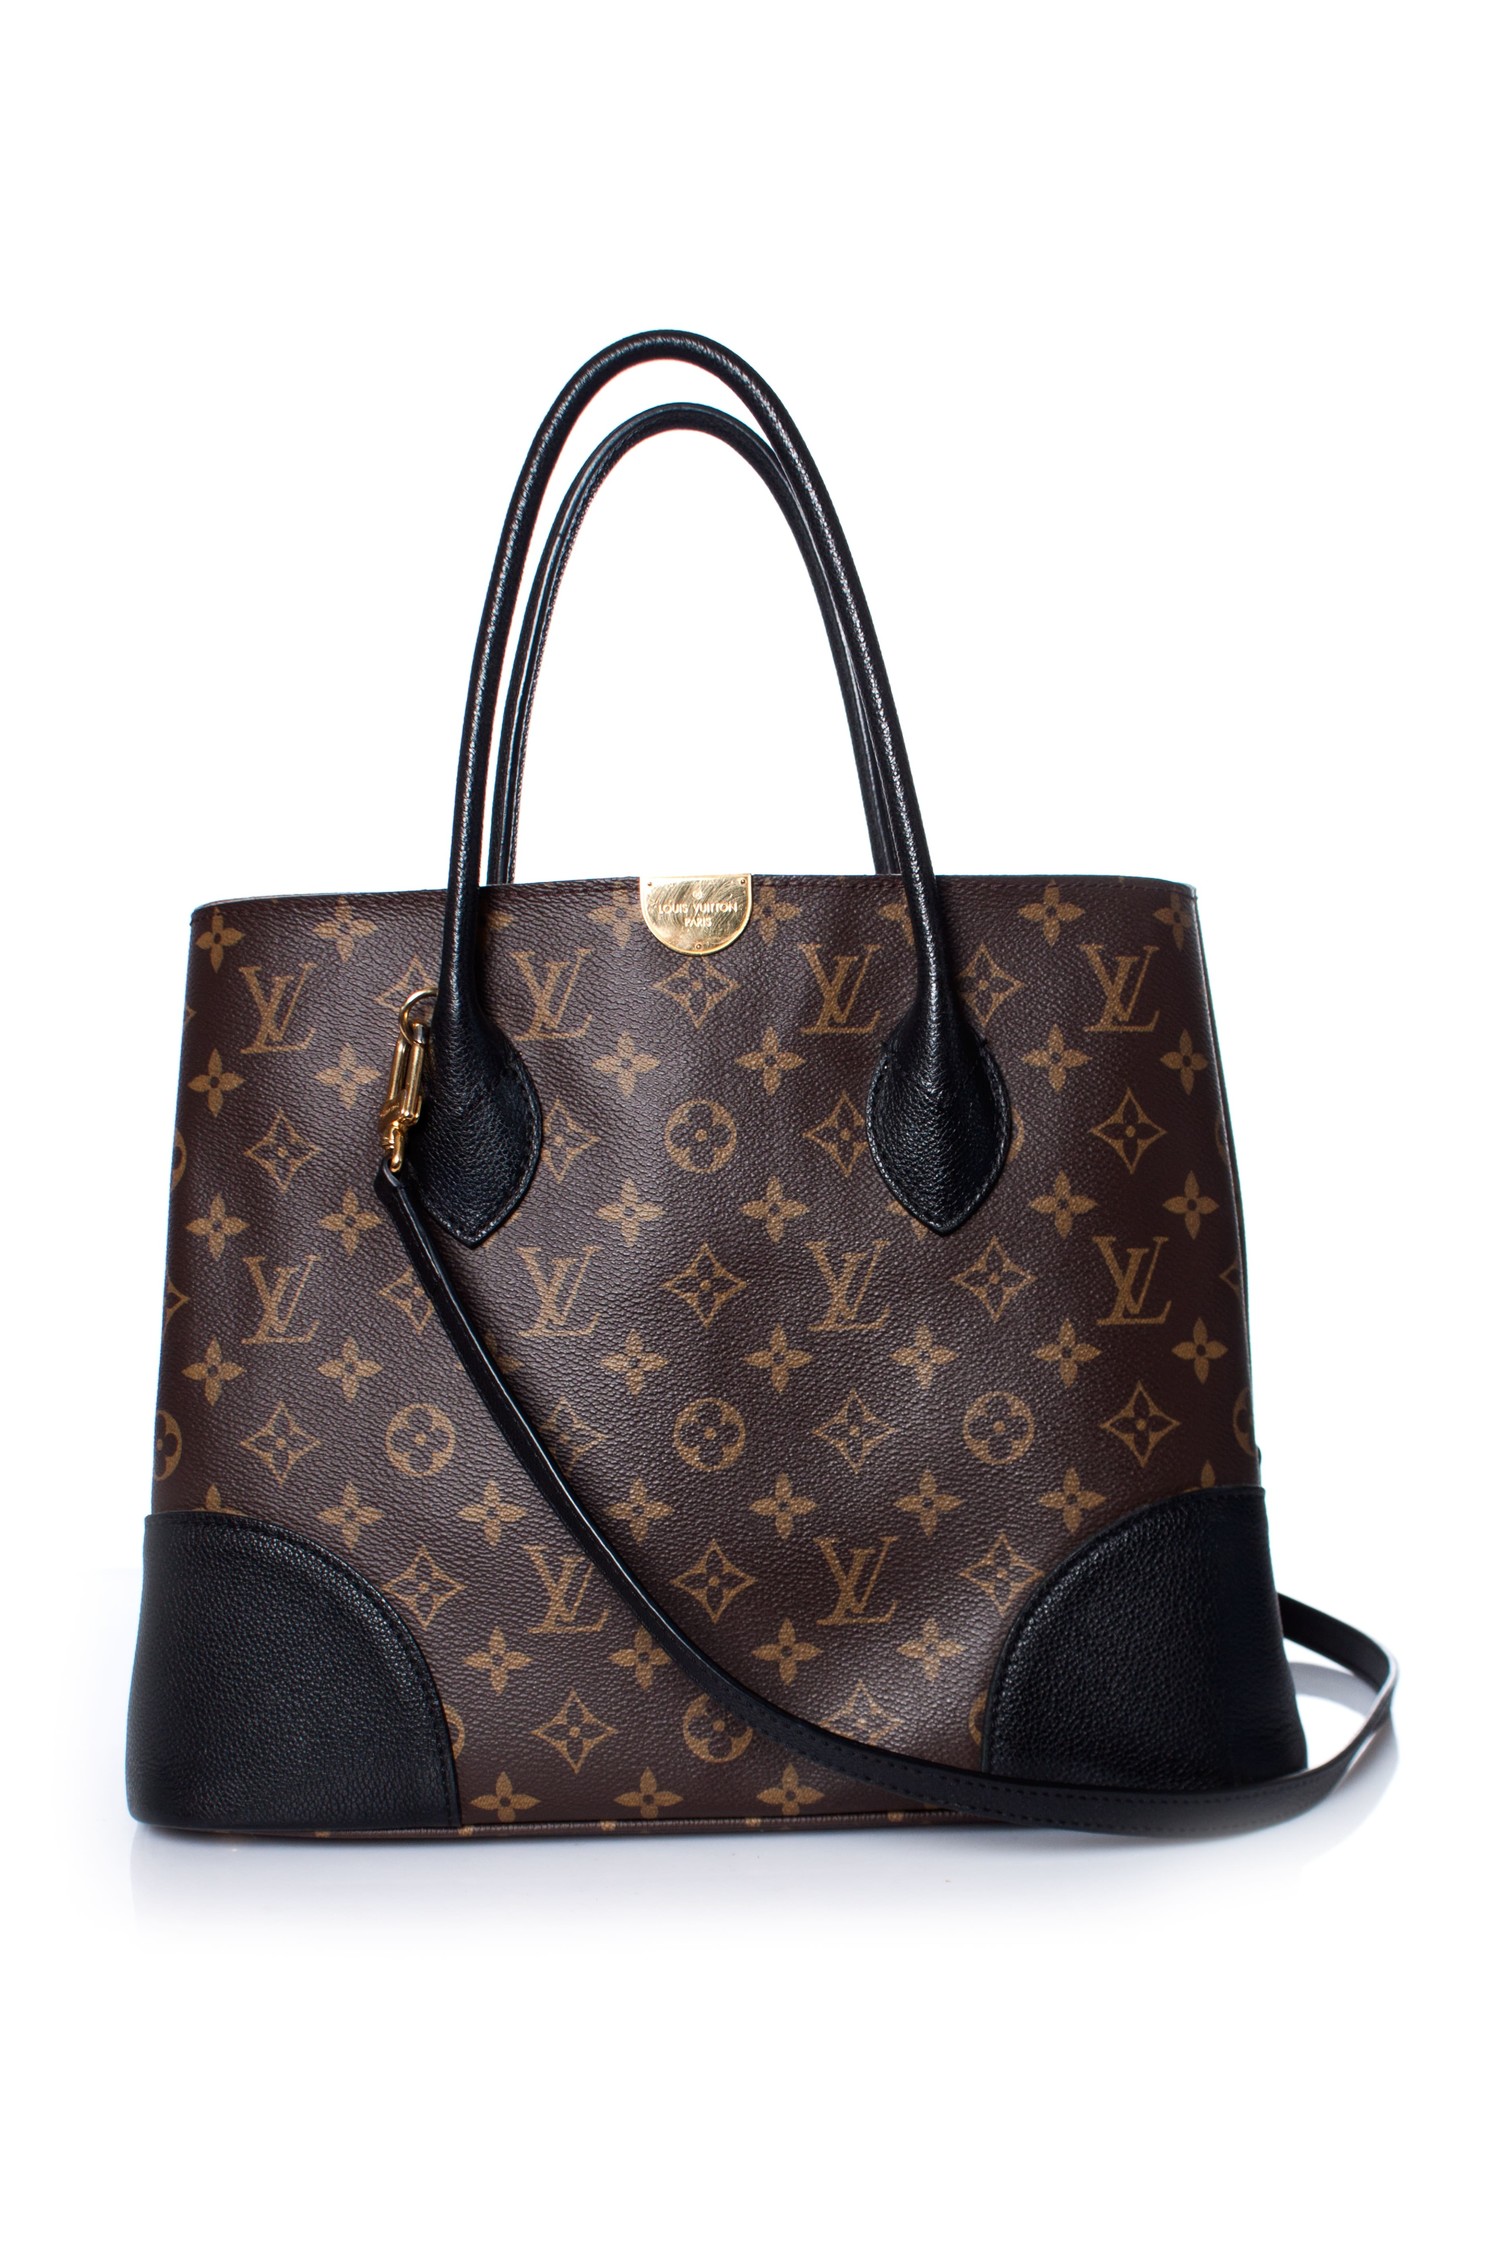 Louis Vuitton Flandrin Tote - Unboxing, What Fits, Pros Cons, Mod